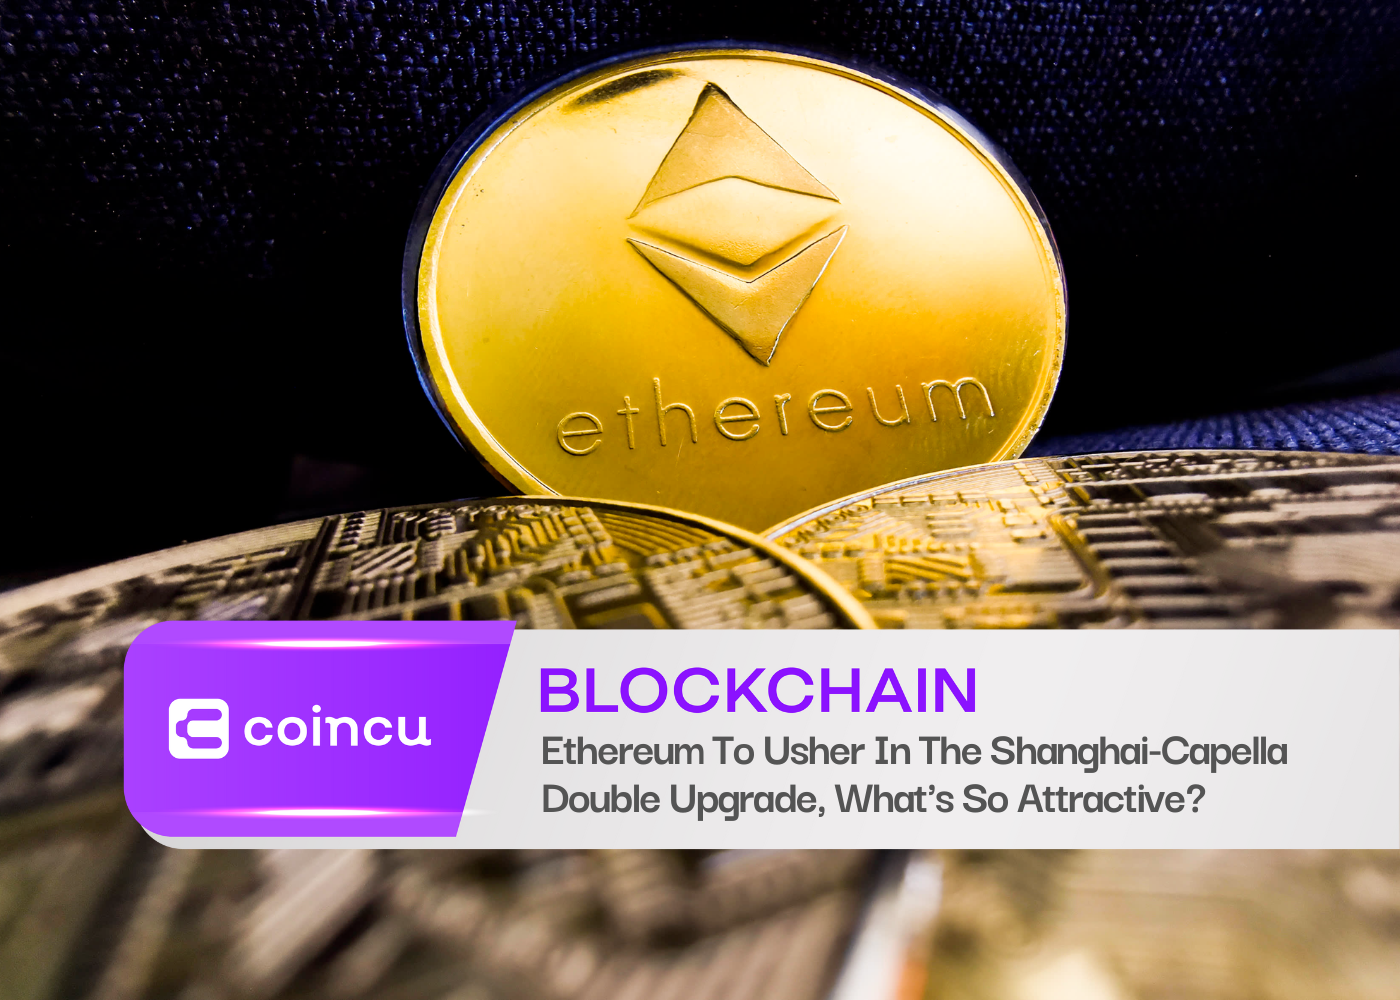 Ethereum To Usher In The. Shanghai-Capella Double Upgrade, What's So Attractive?